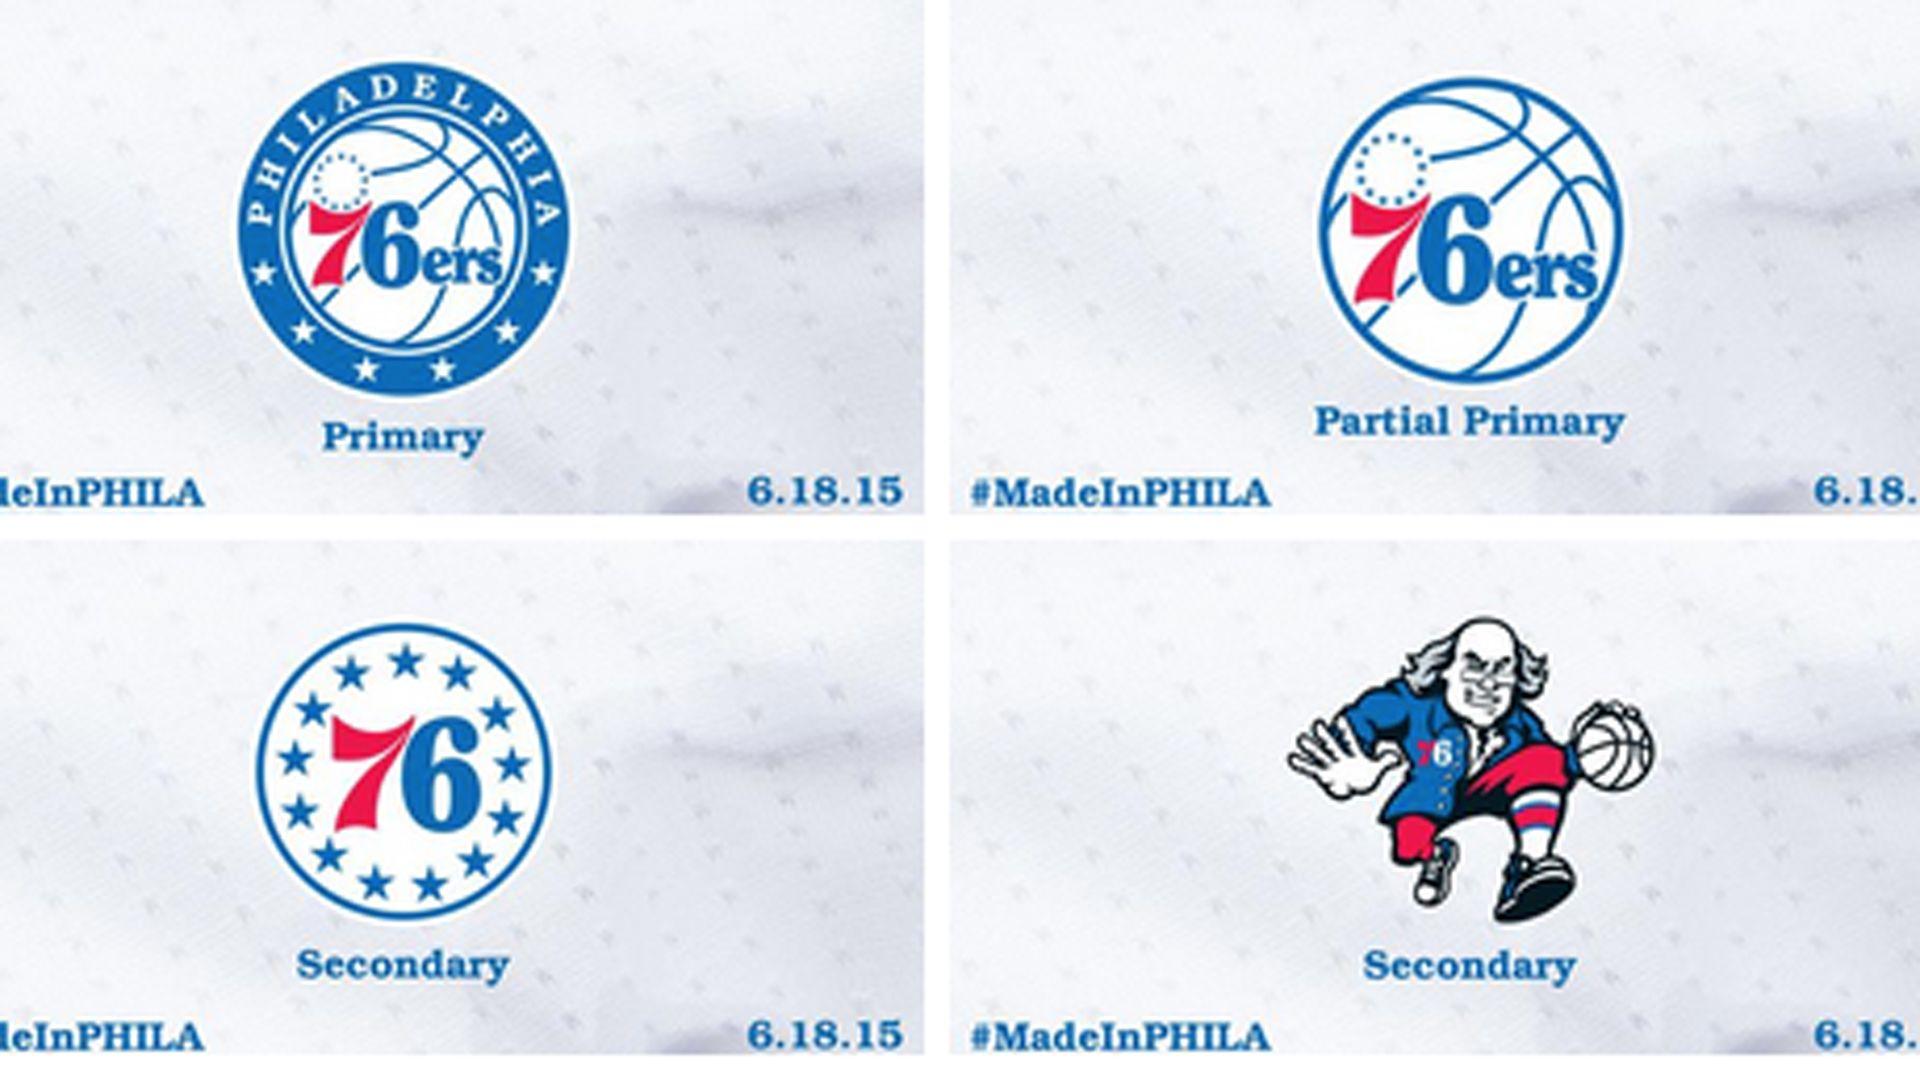 Sixers Logo - The 76ers new logo